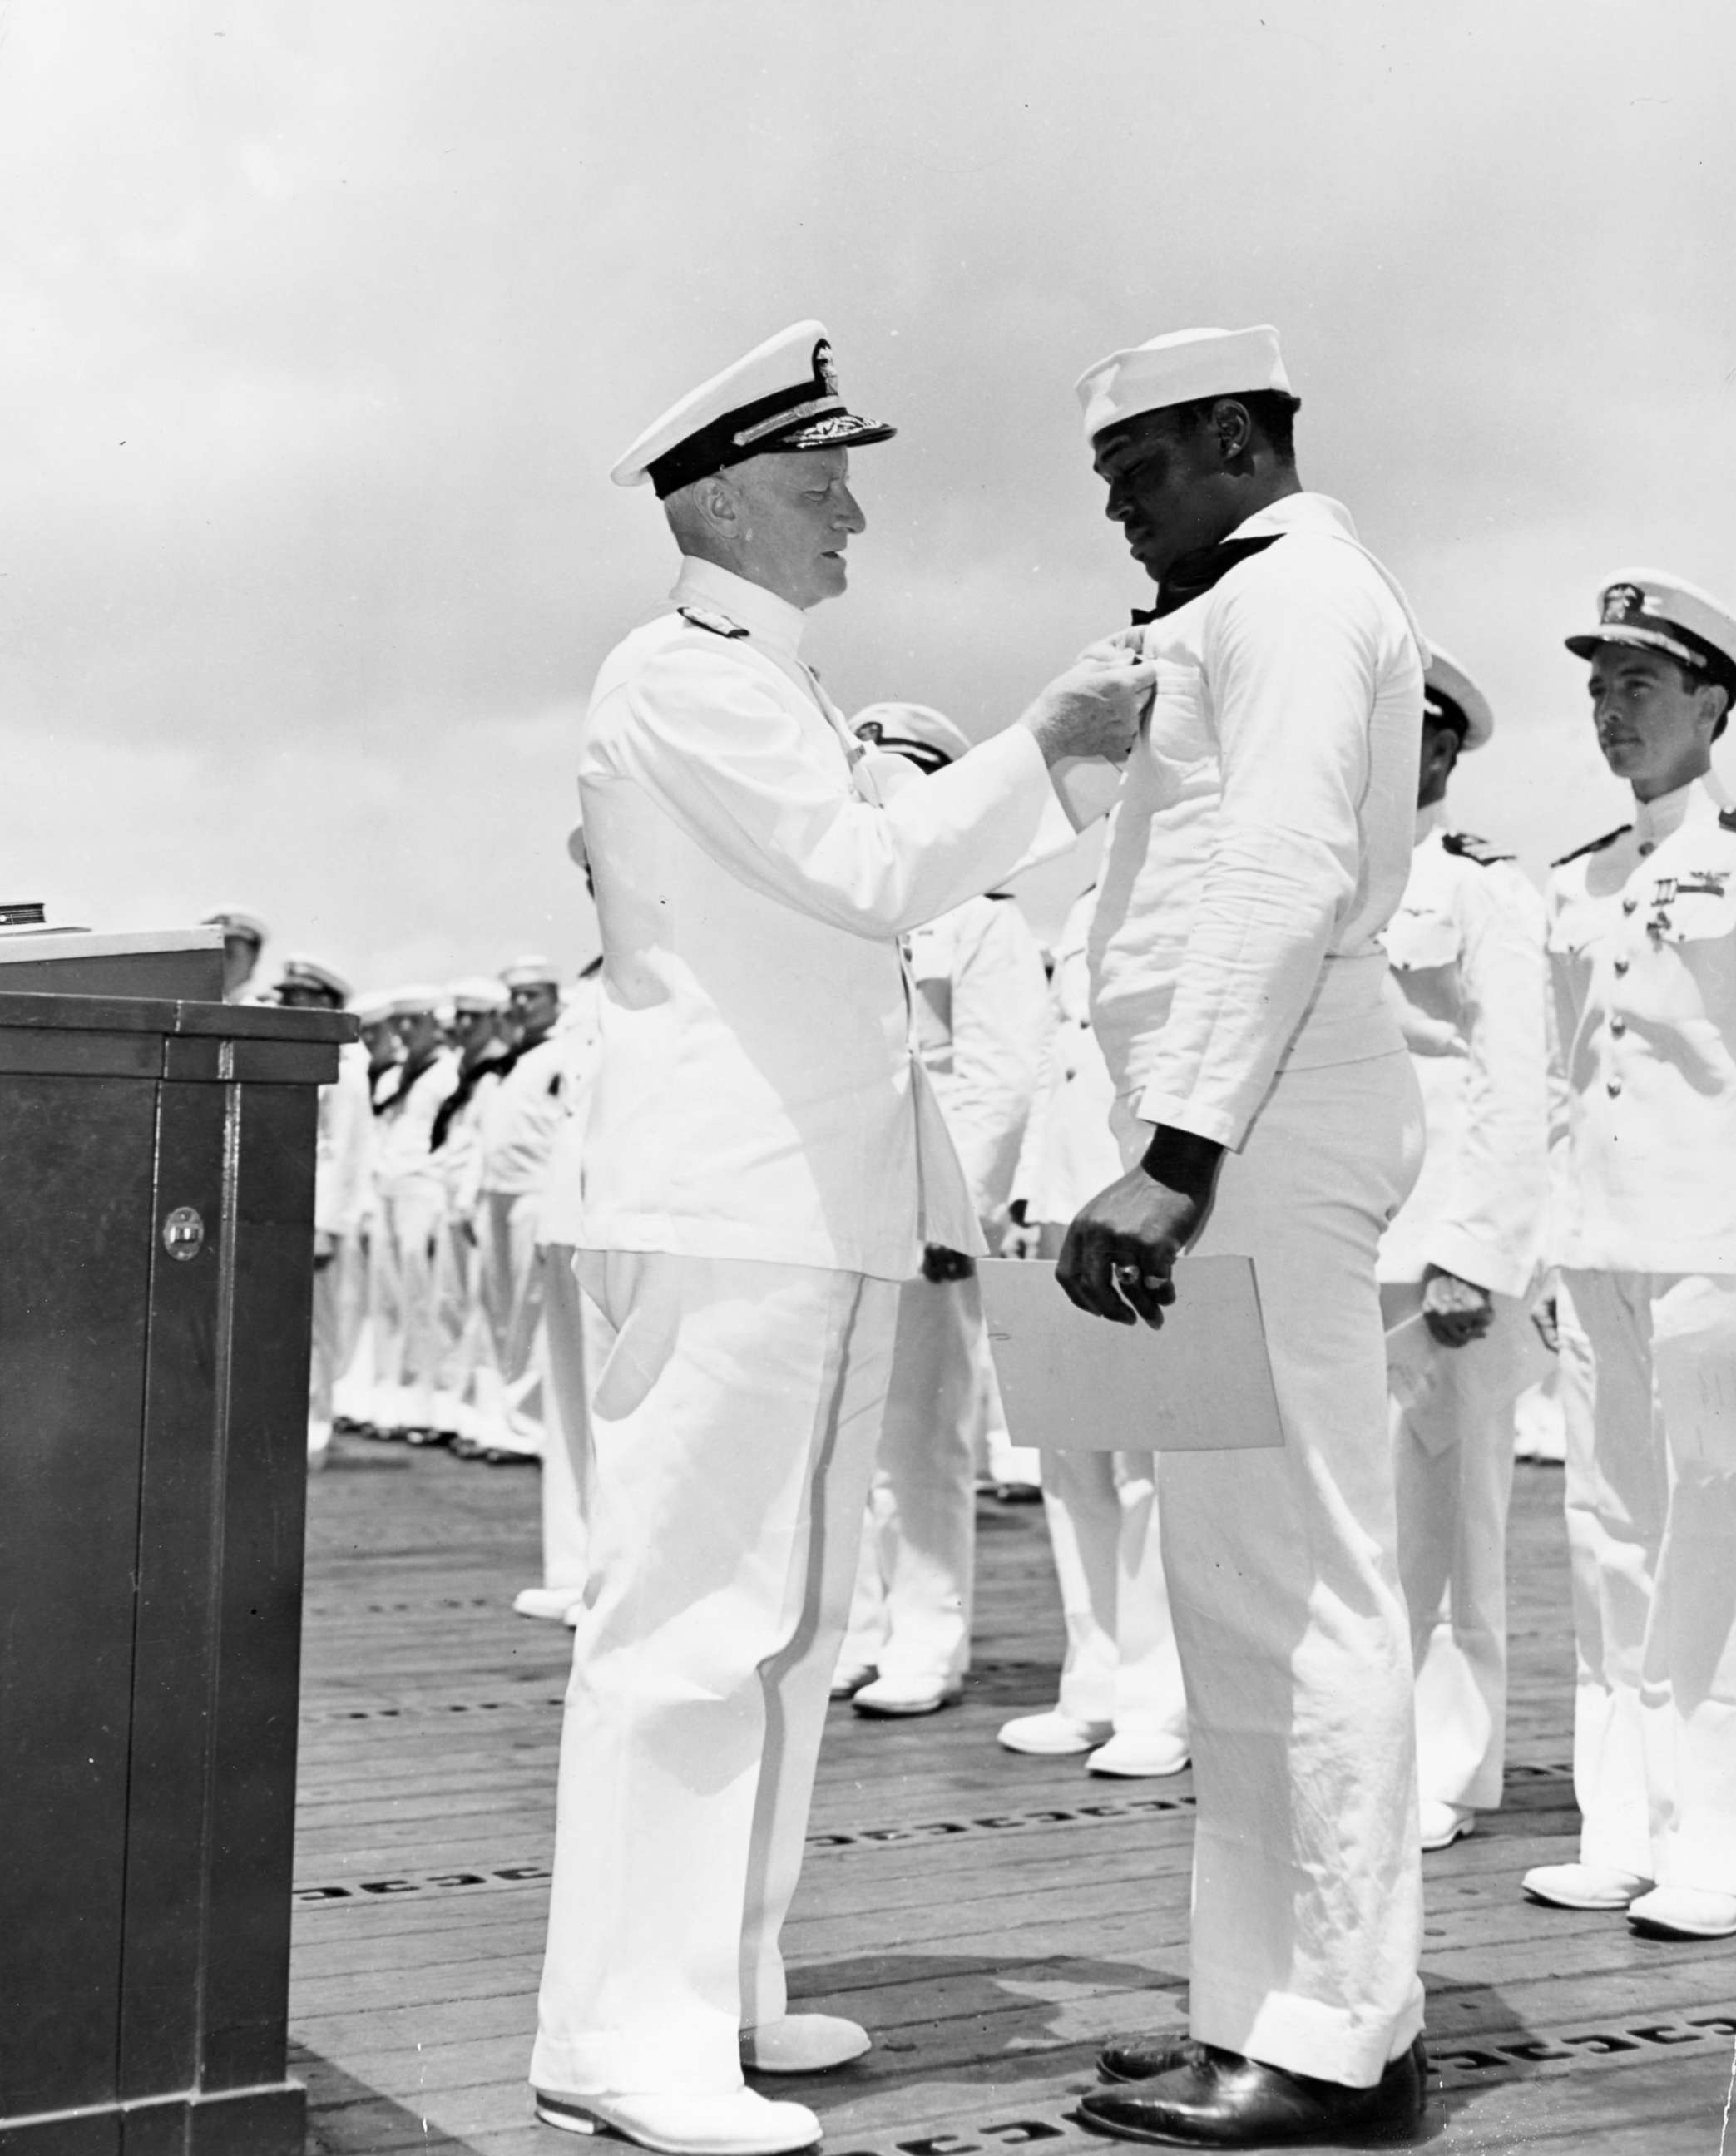 PHOTO: Adm. Chester Nimitz awards the Navy Cross medal to Mess Attendant 2nd Class Doris Miller for his actions aboard the battleship USS West Virginia (BB-48) during the Dec. 7, 1941 Japanese attack on Pearl Harbor.